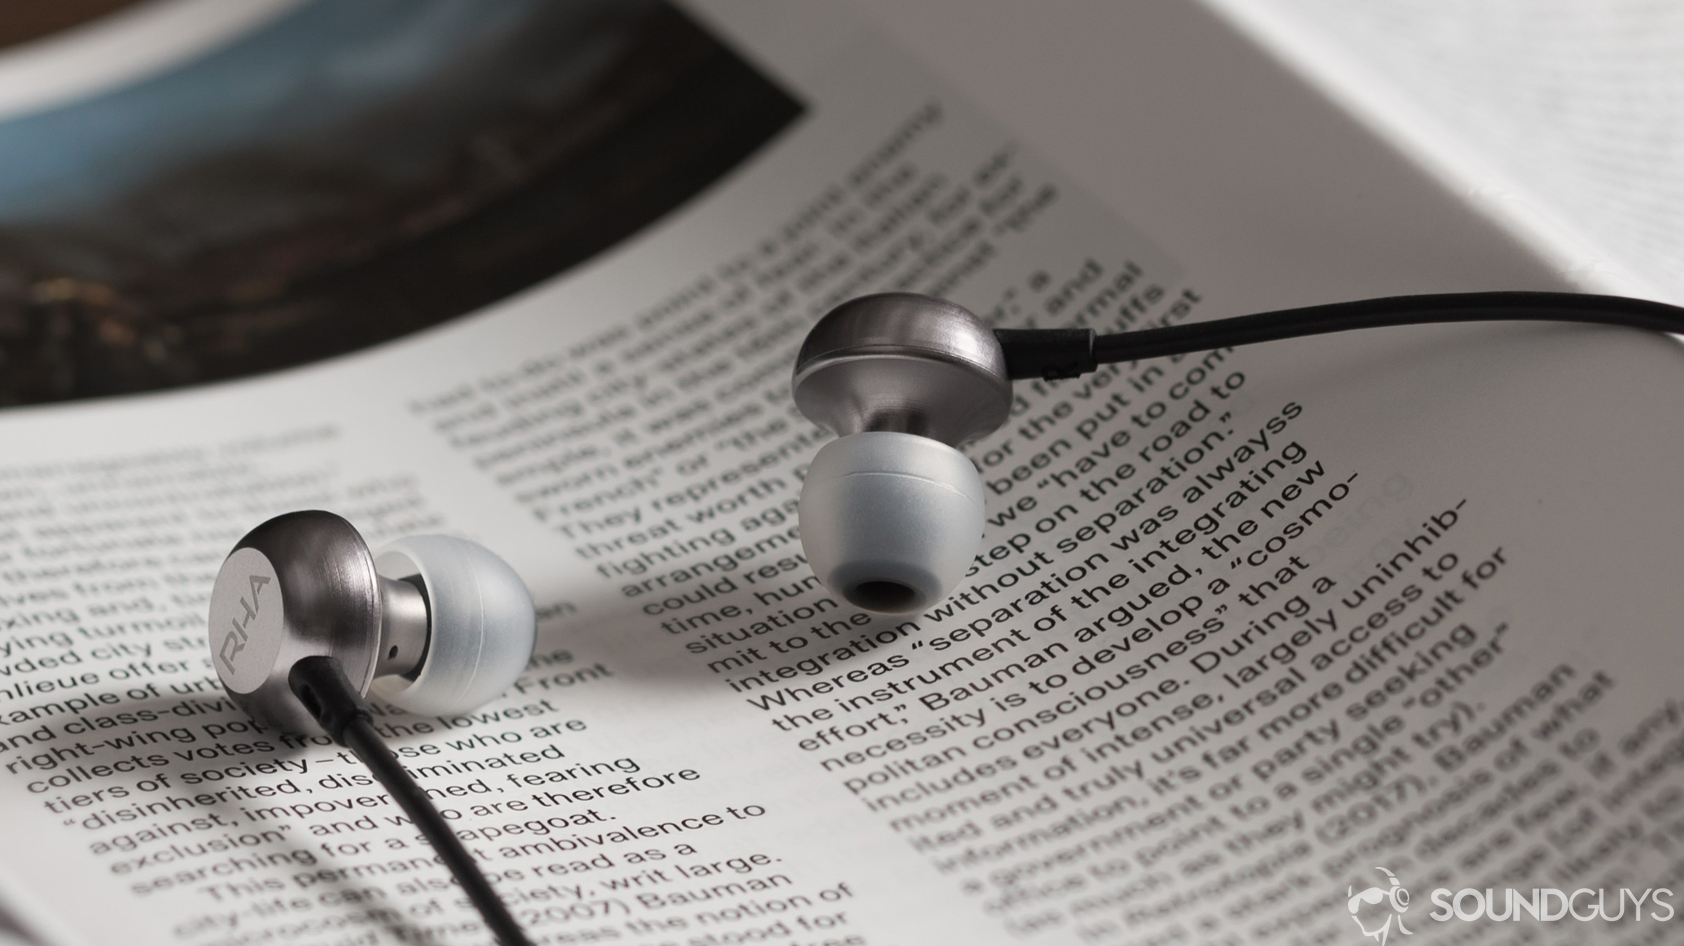 A photo of the RHA MA650 earbuds for Android on a book.